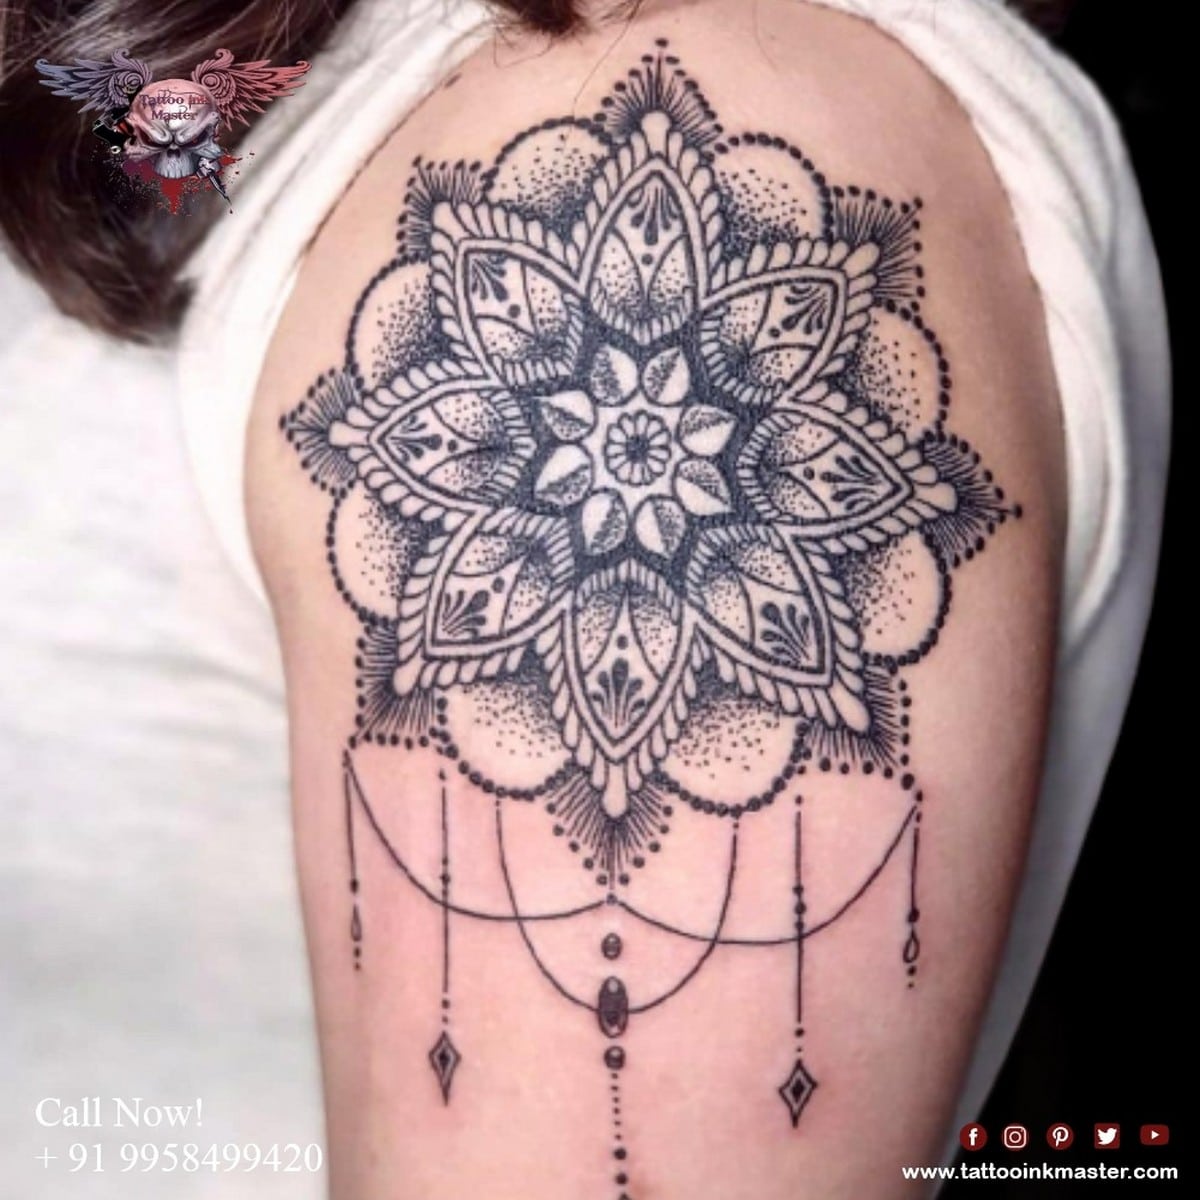 You are currently viewing Highly Creative Hand Tattoo in Artistic Style